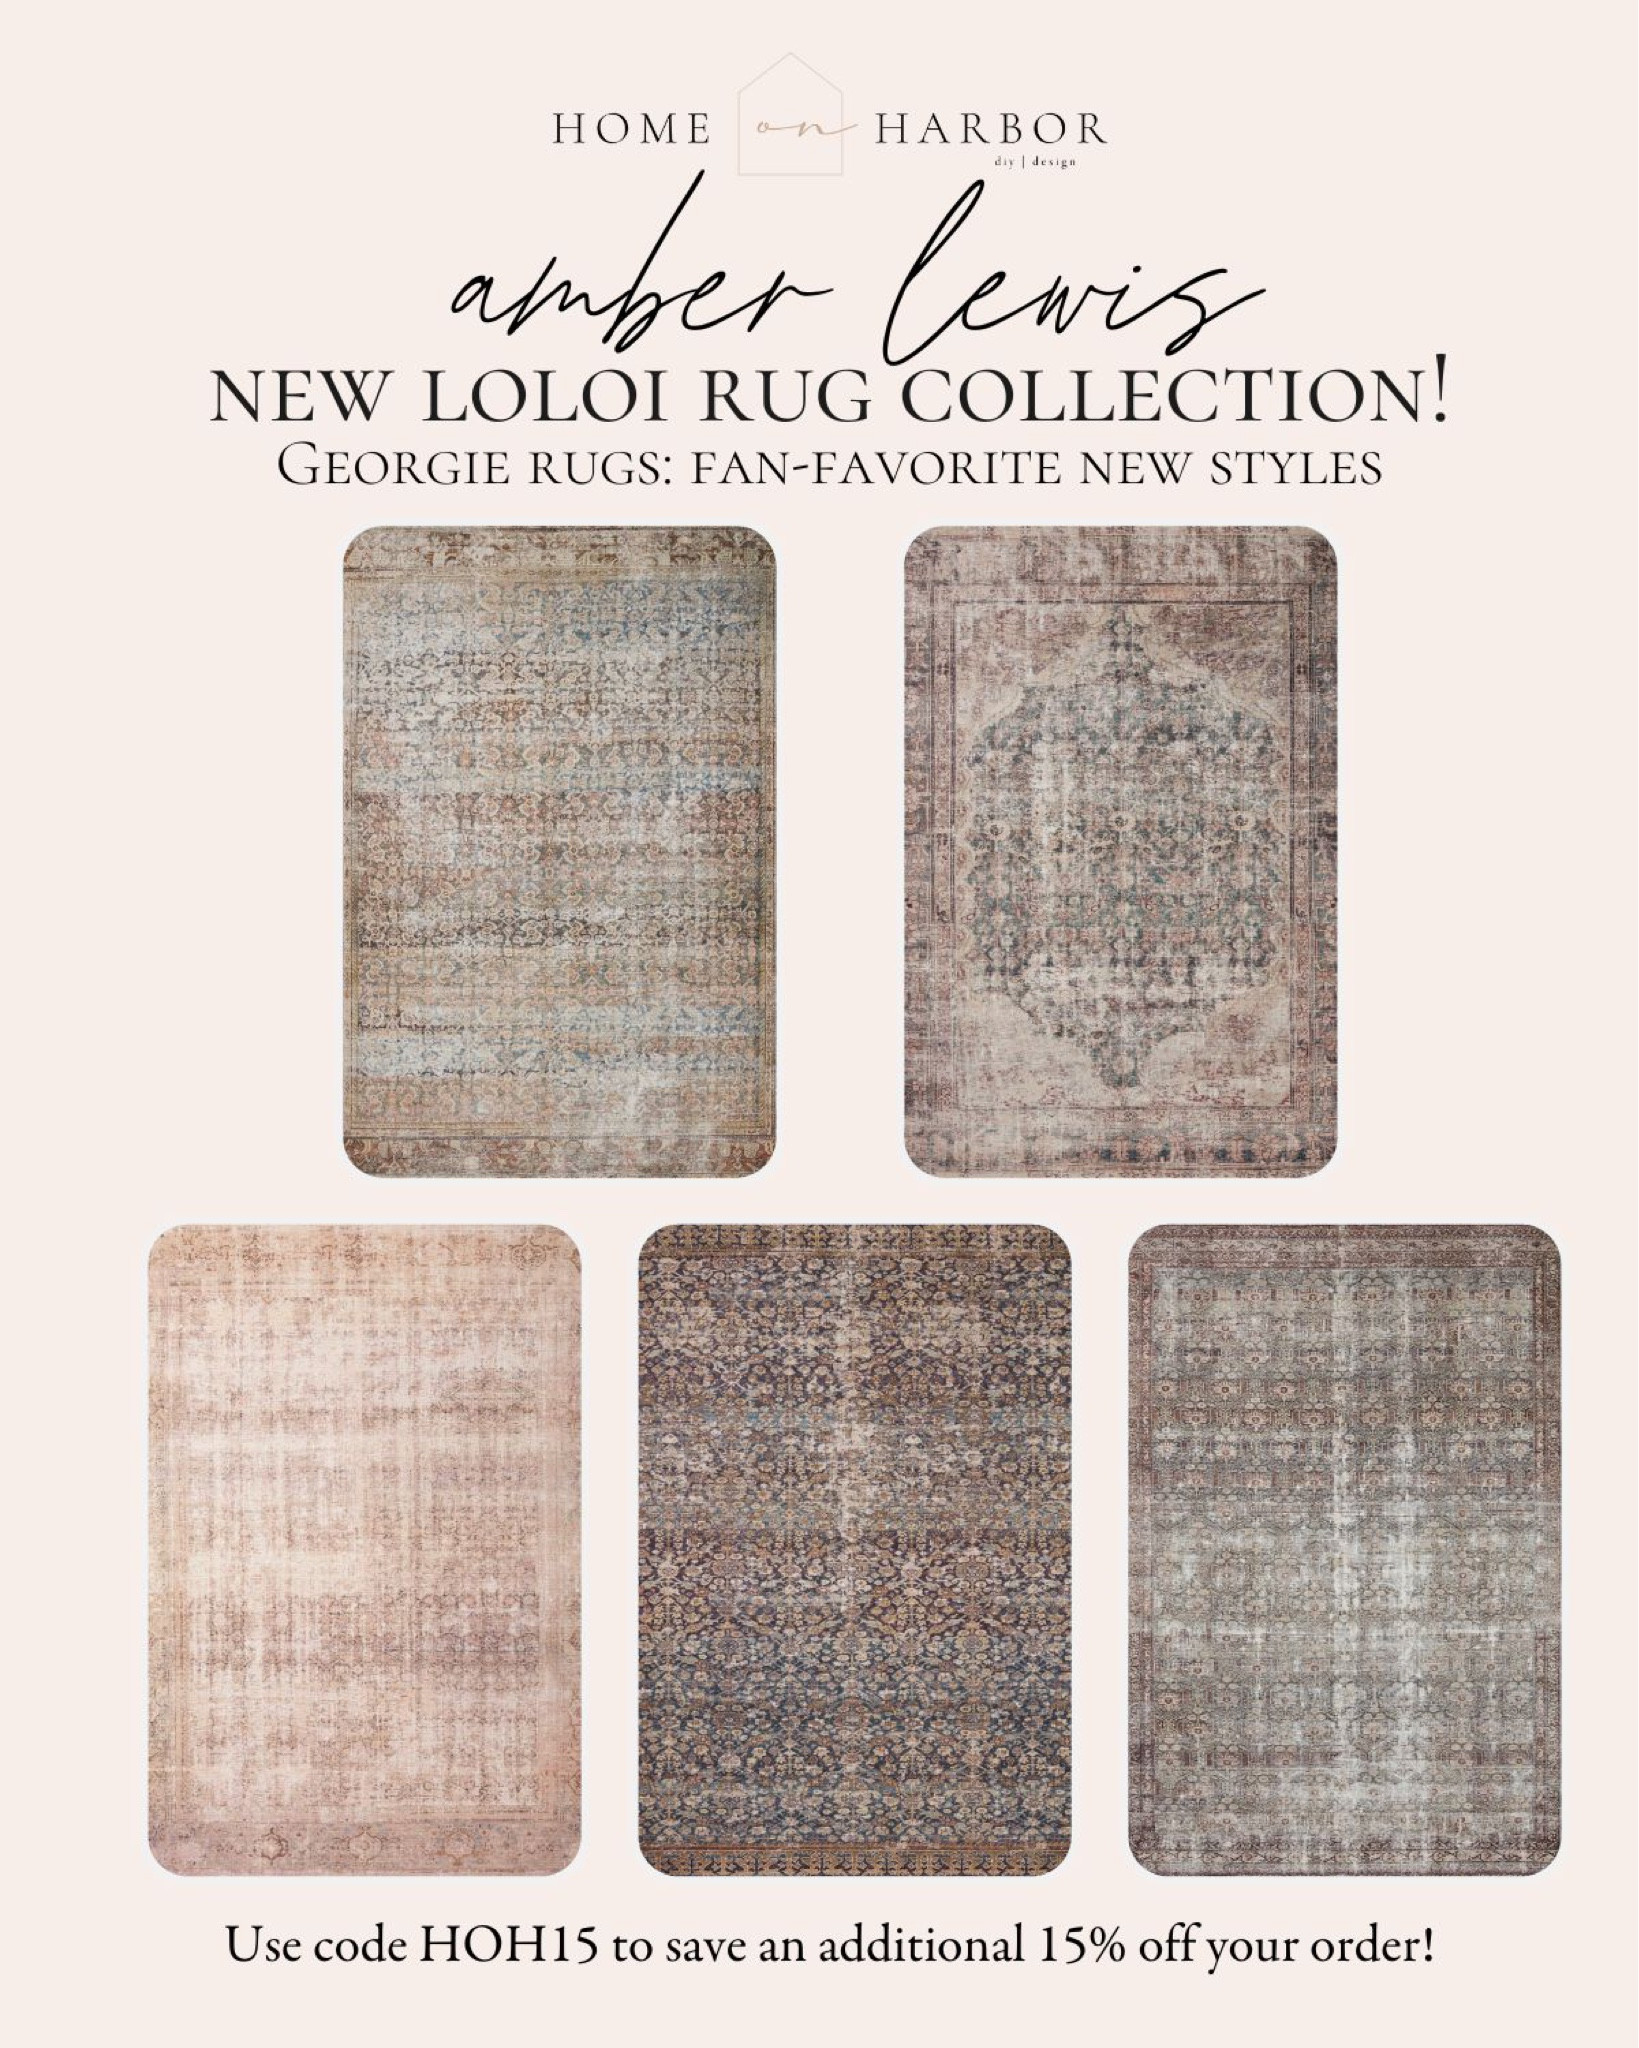 New amber lewis x Loloi Rugs collections just dropped! I'm in love wit